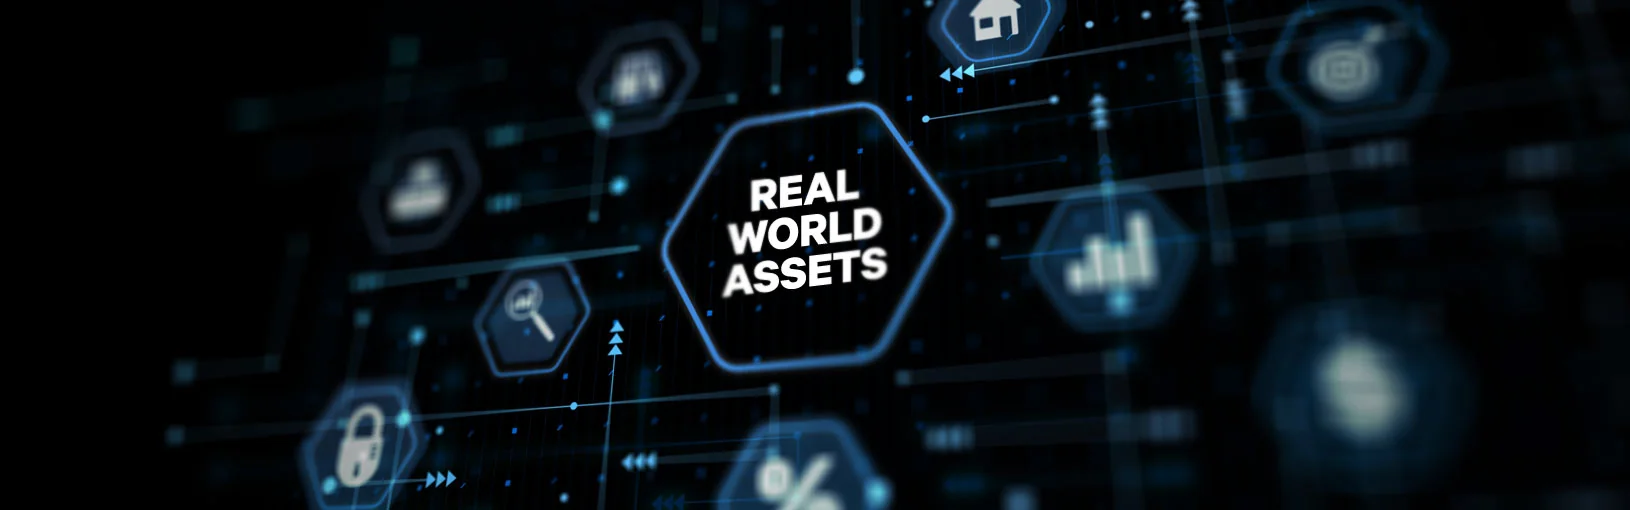 real-world-assets